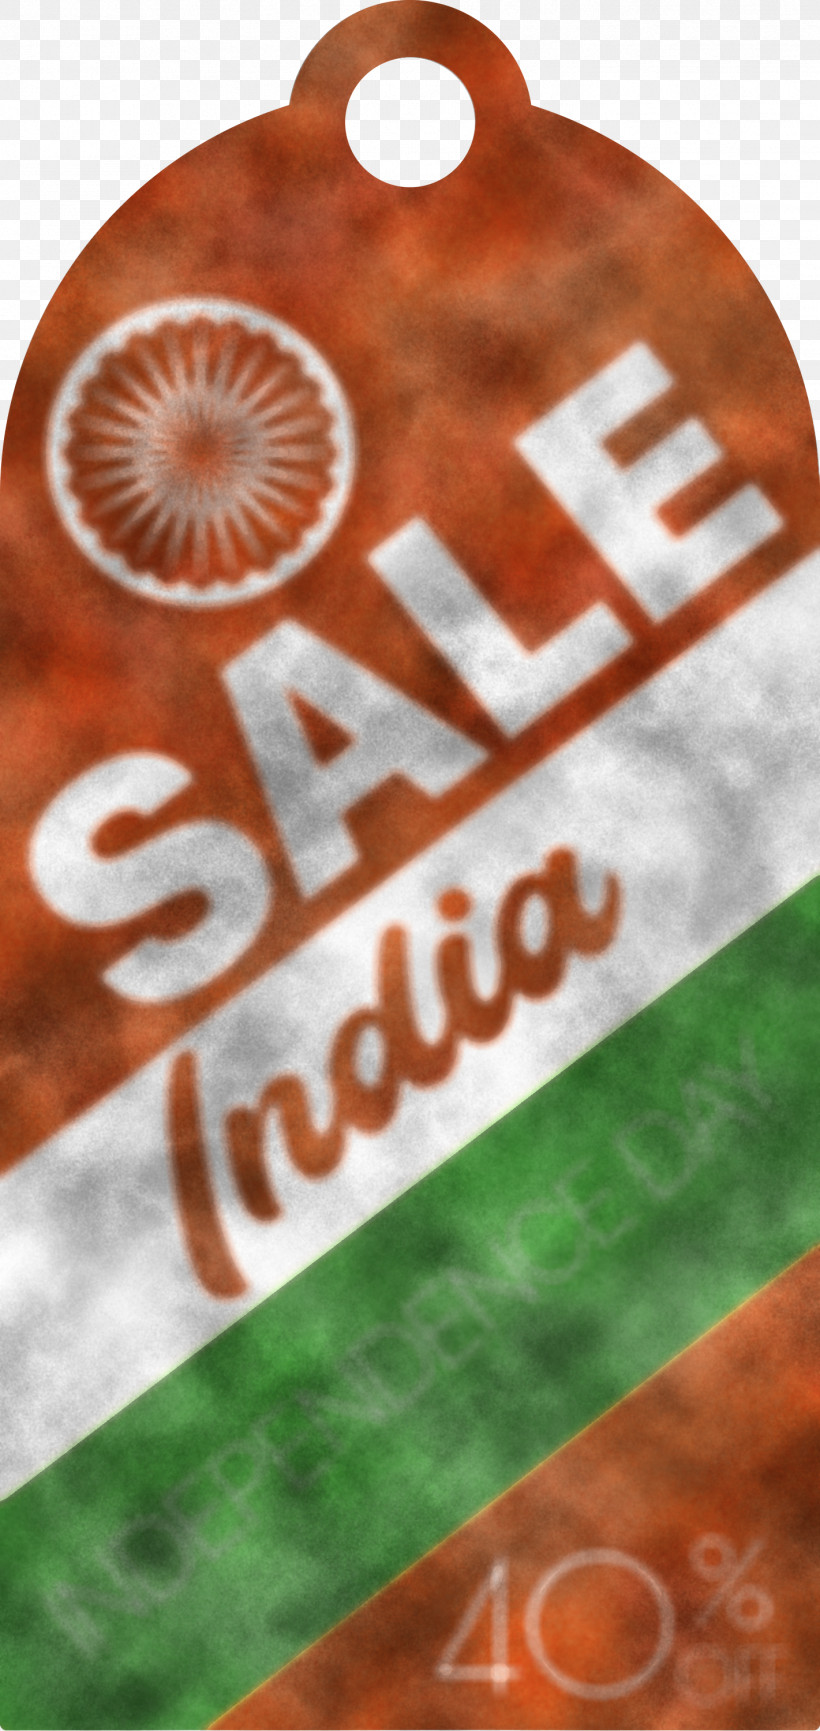 India Indenpendence Day Sale Tag India Indenpendence Day Sale Label, PNG, 1421x3000px, India Indenpendence Day Sale Tag, India Indenpendence Day Sale Label, Meter Download Free